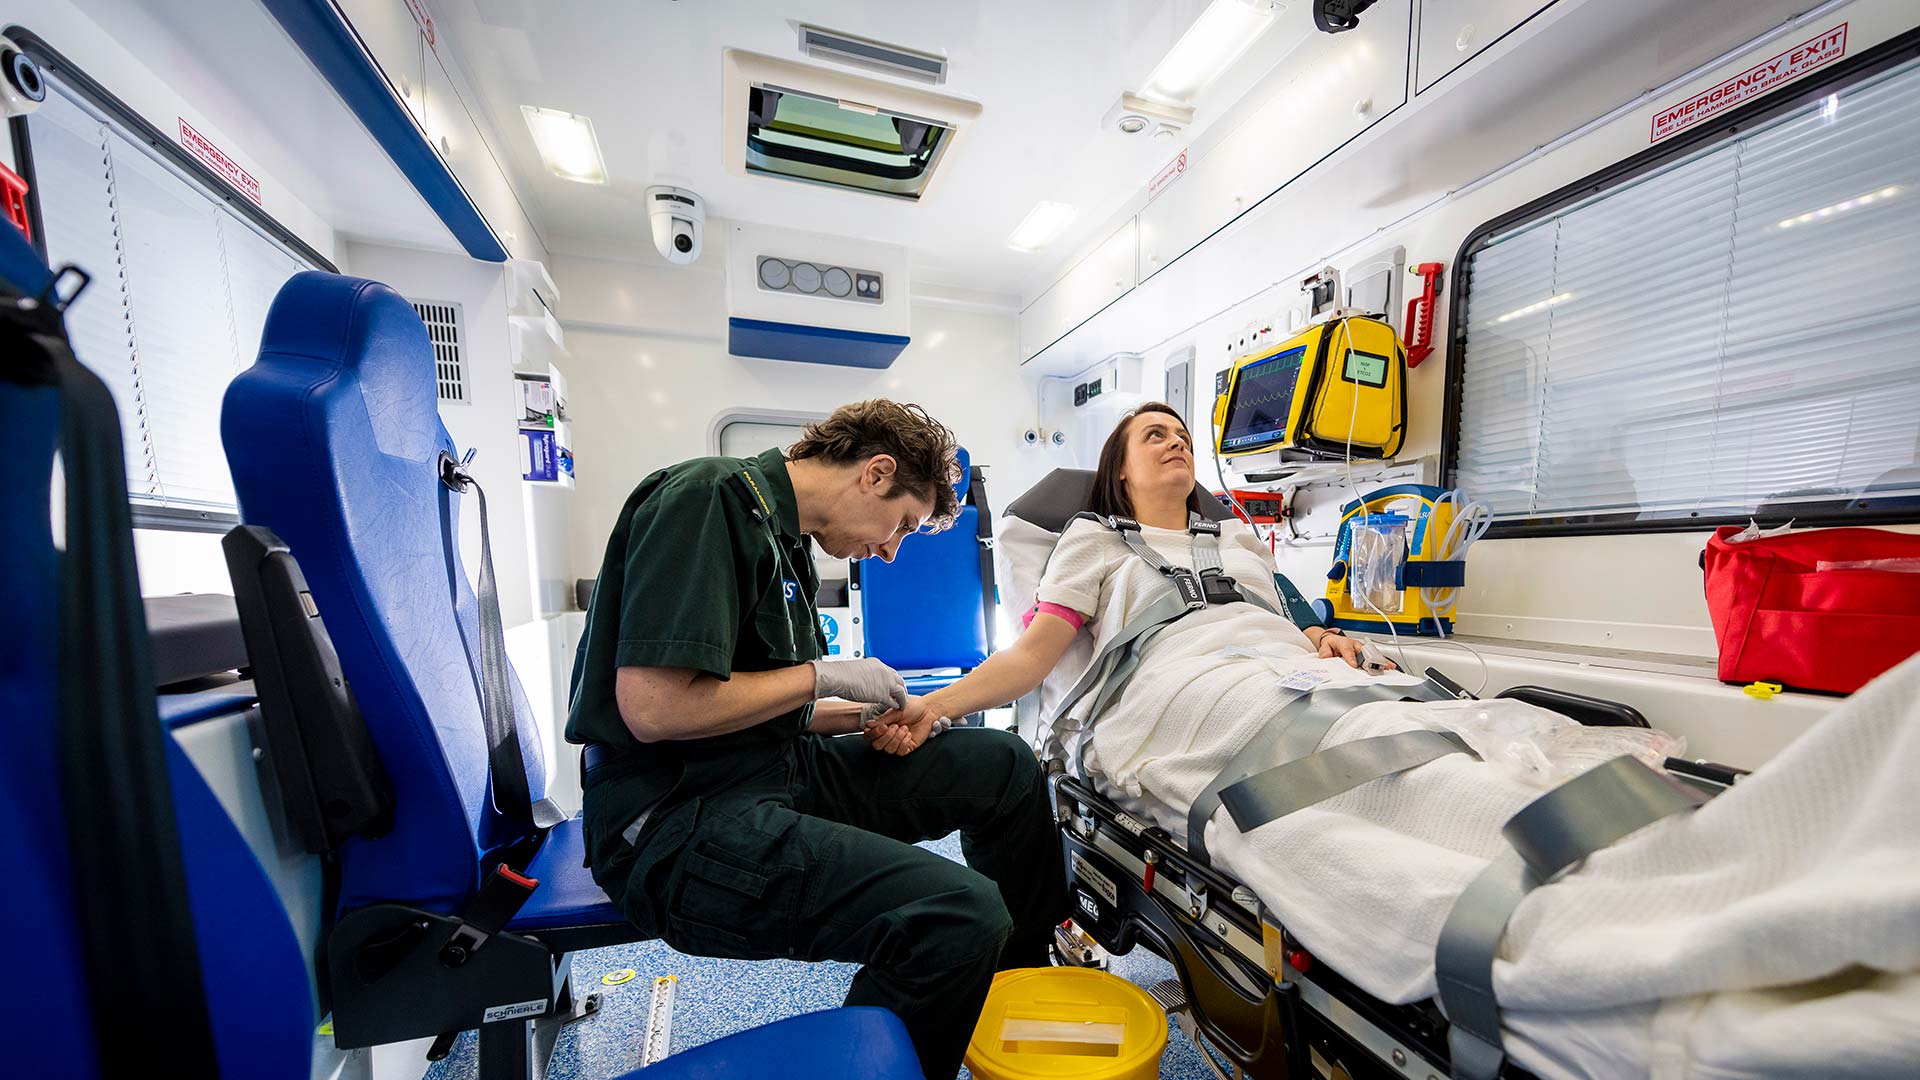 Man putting a cannula in a ladies arm in an ambulance